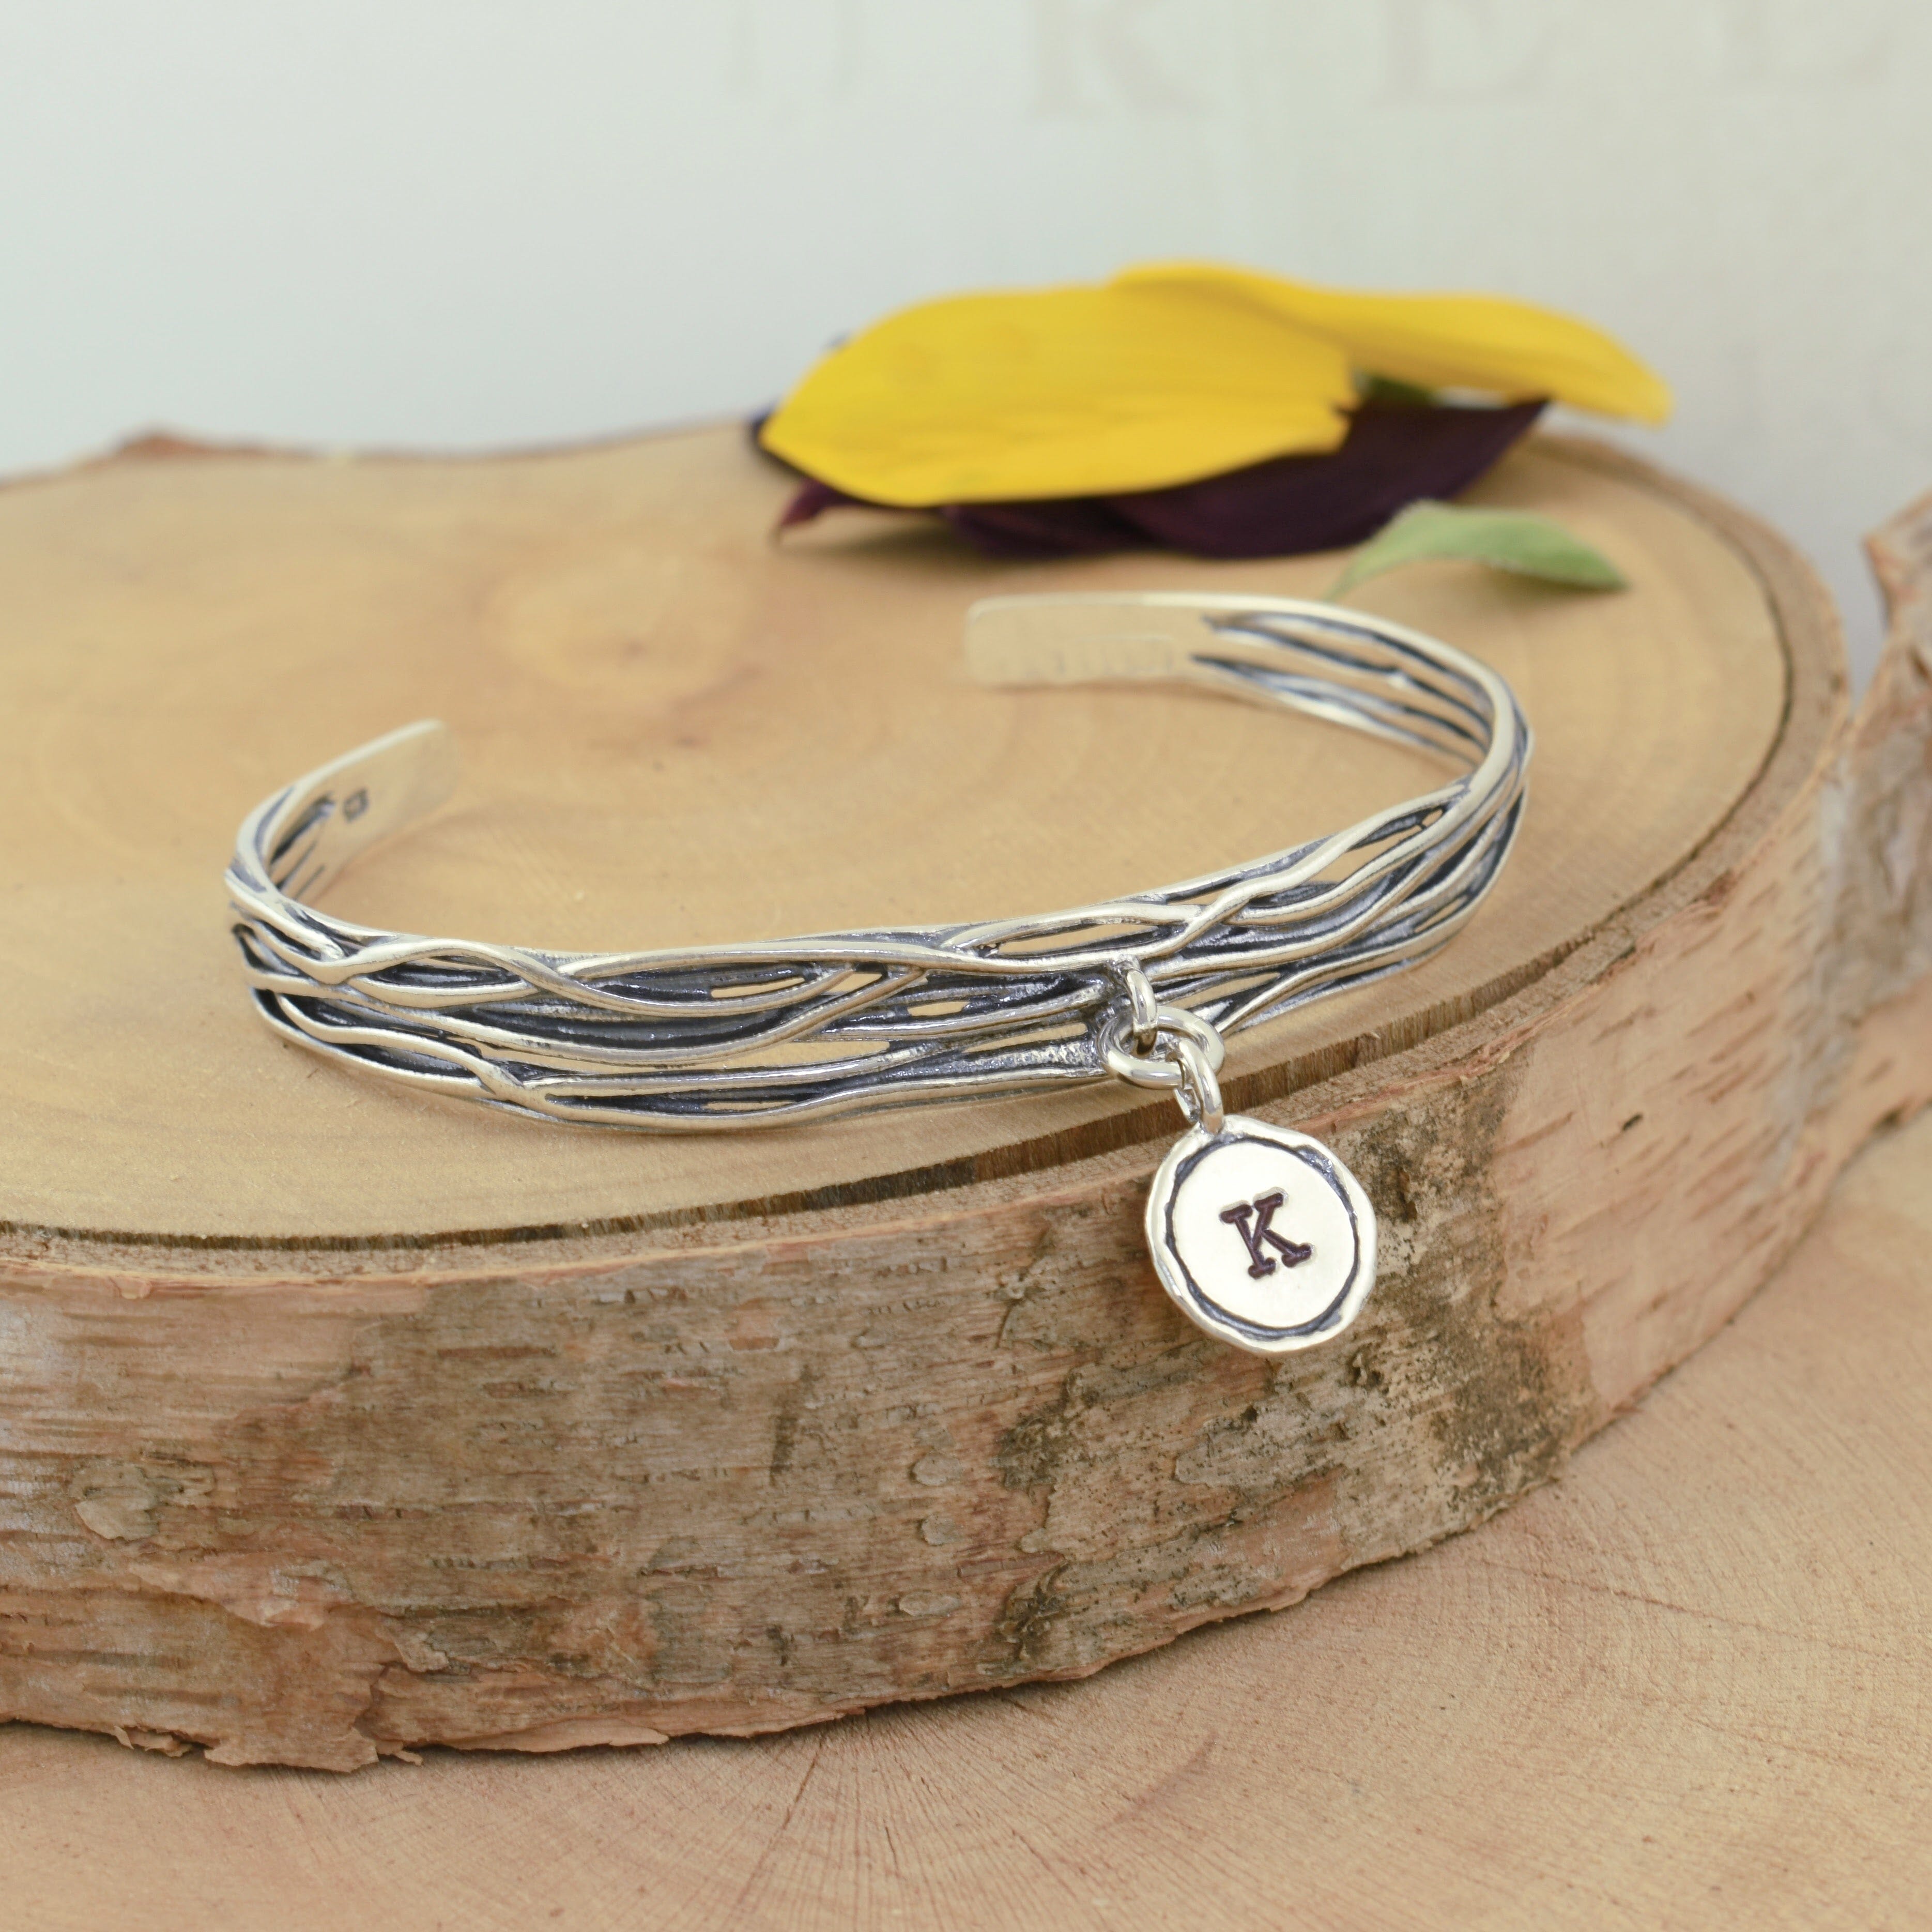 .925 sterling silver cuff with personalized initial